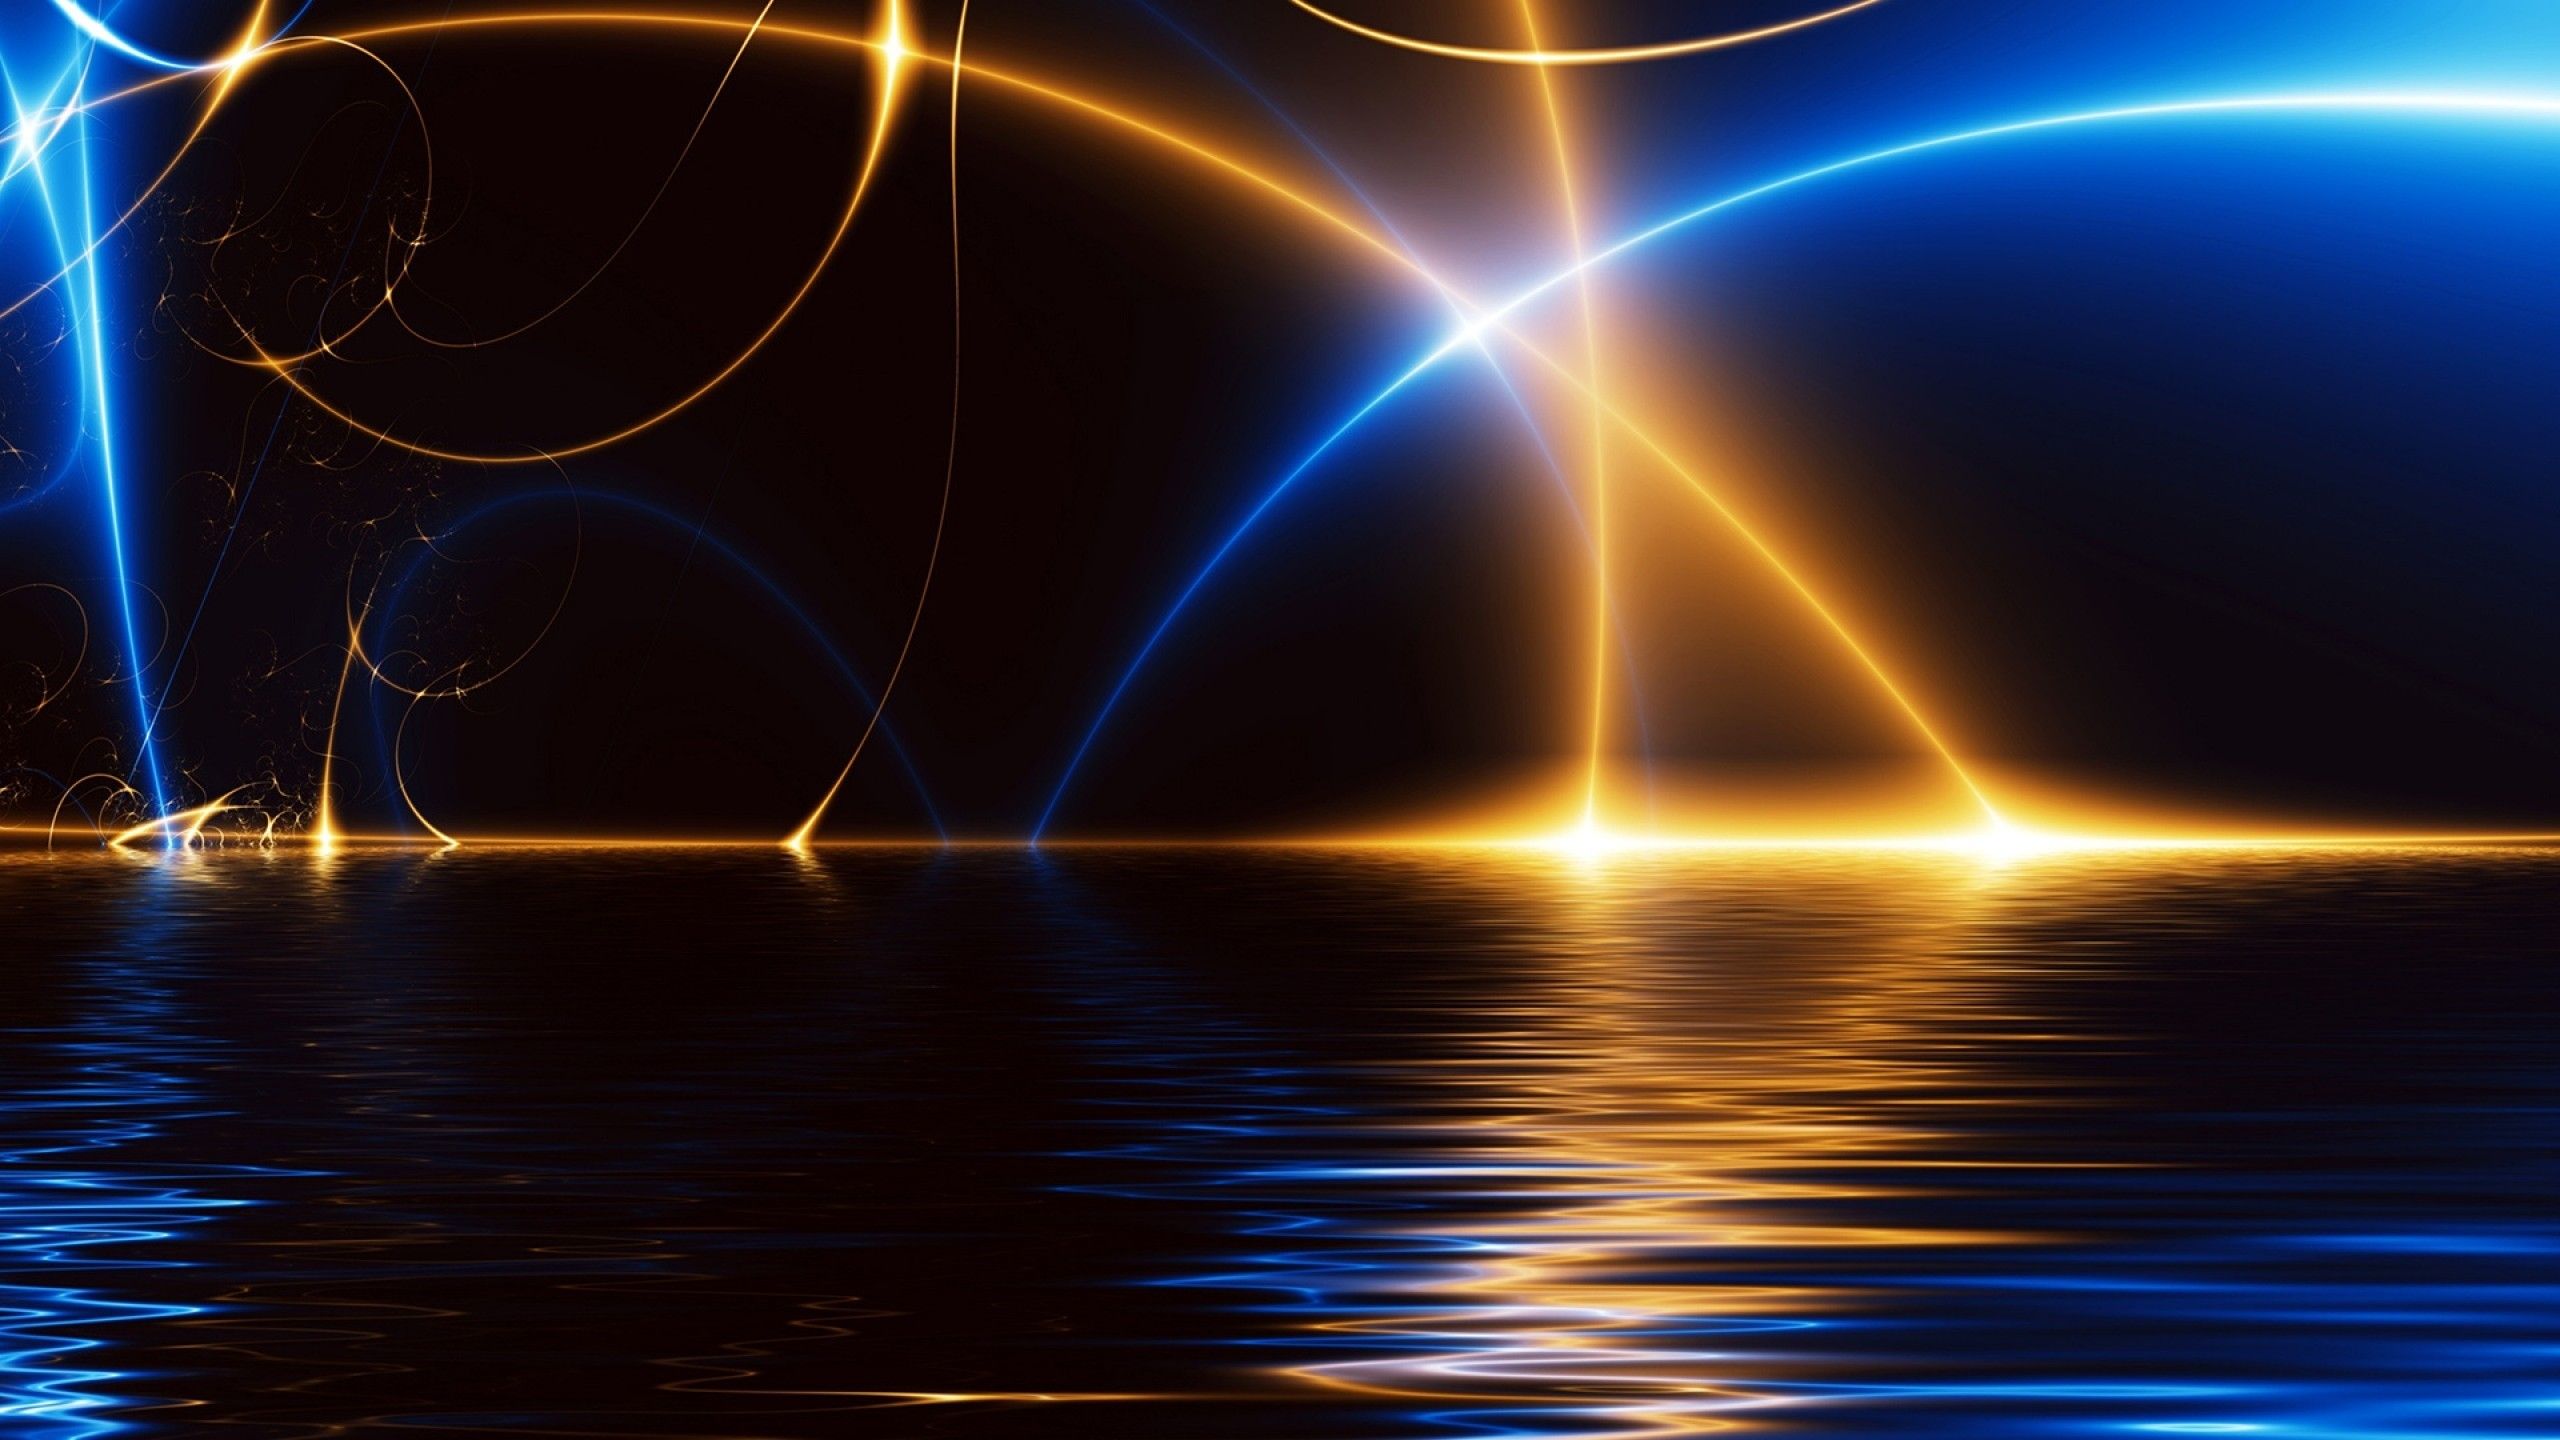 Download 2560x1440 Colorful Light Rays, Water, Waves, Reflection Wallpaper for iMac 27 inch